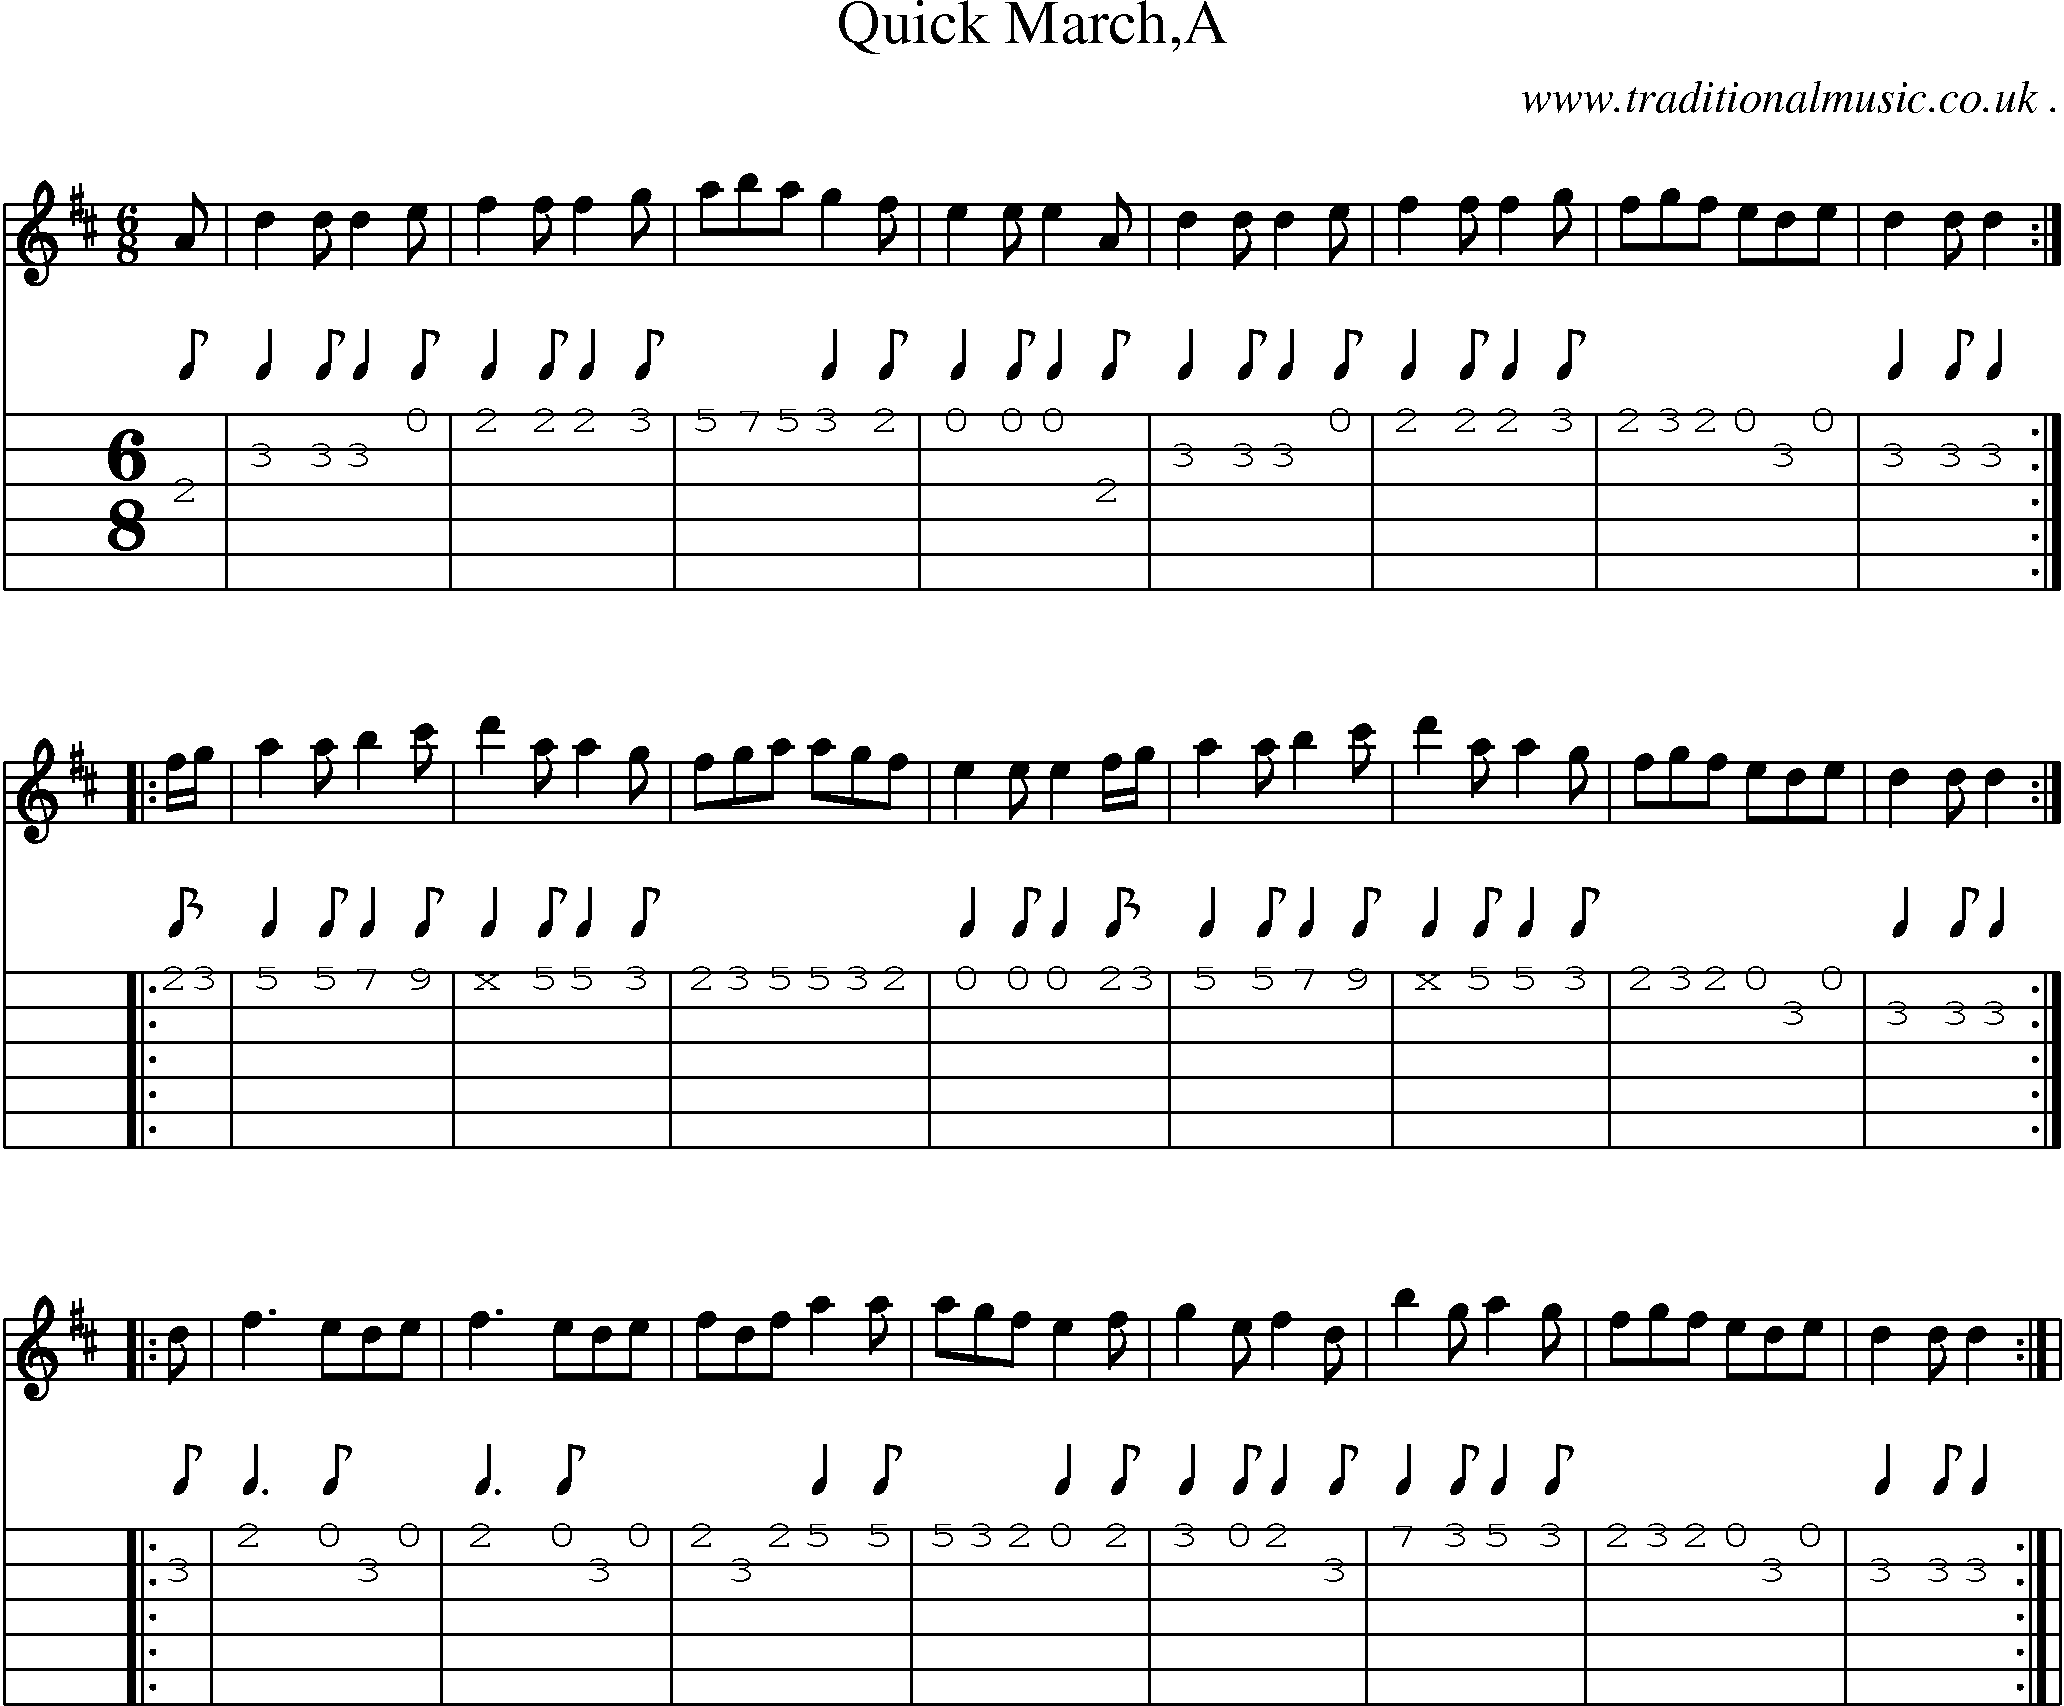 Sheet-Music and Guitar Tabs for Quick Marcha